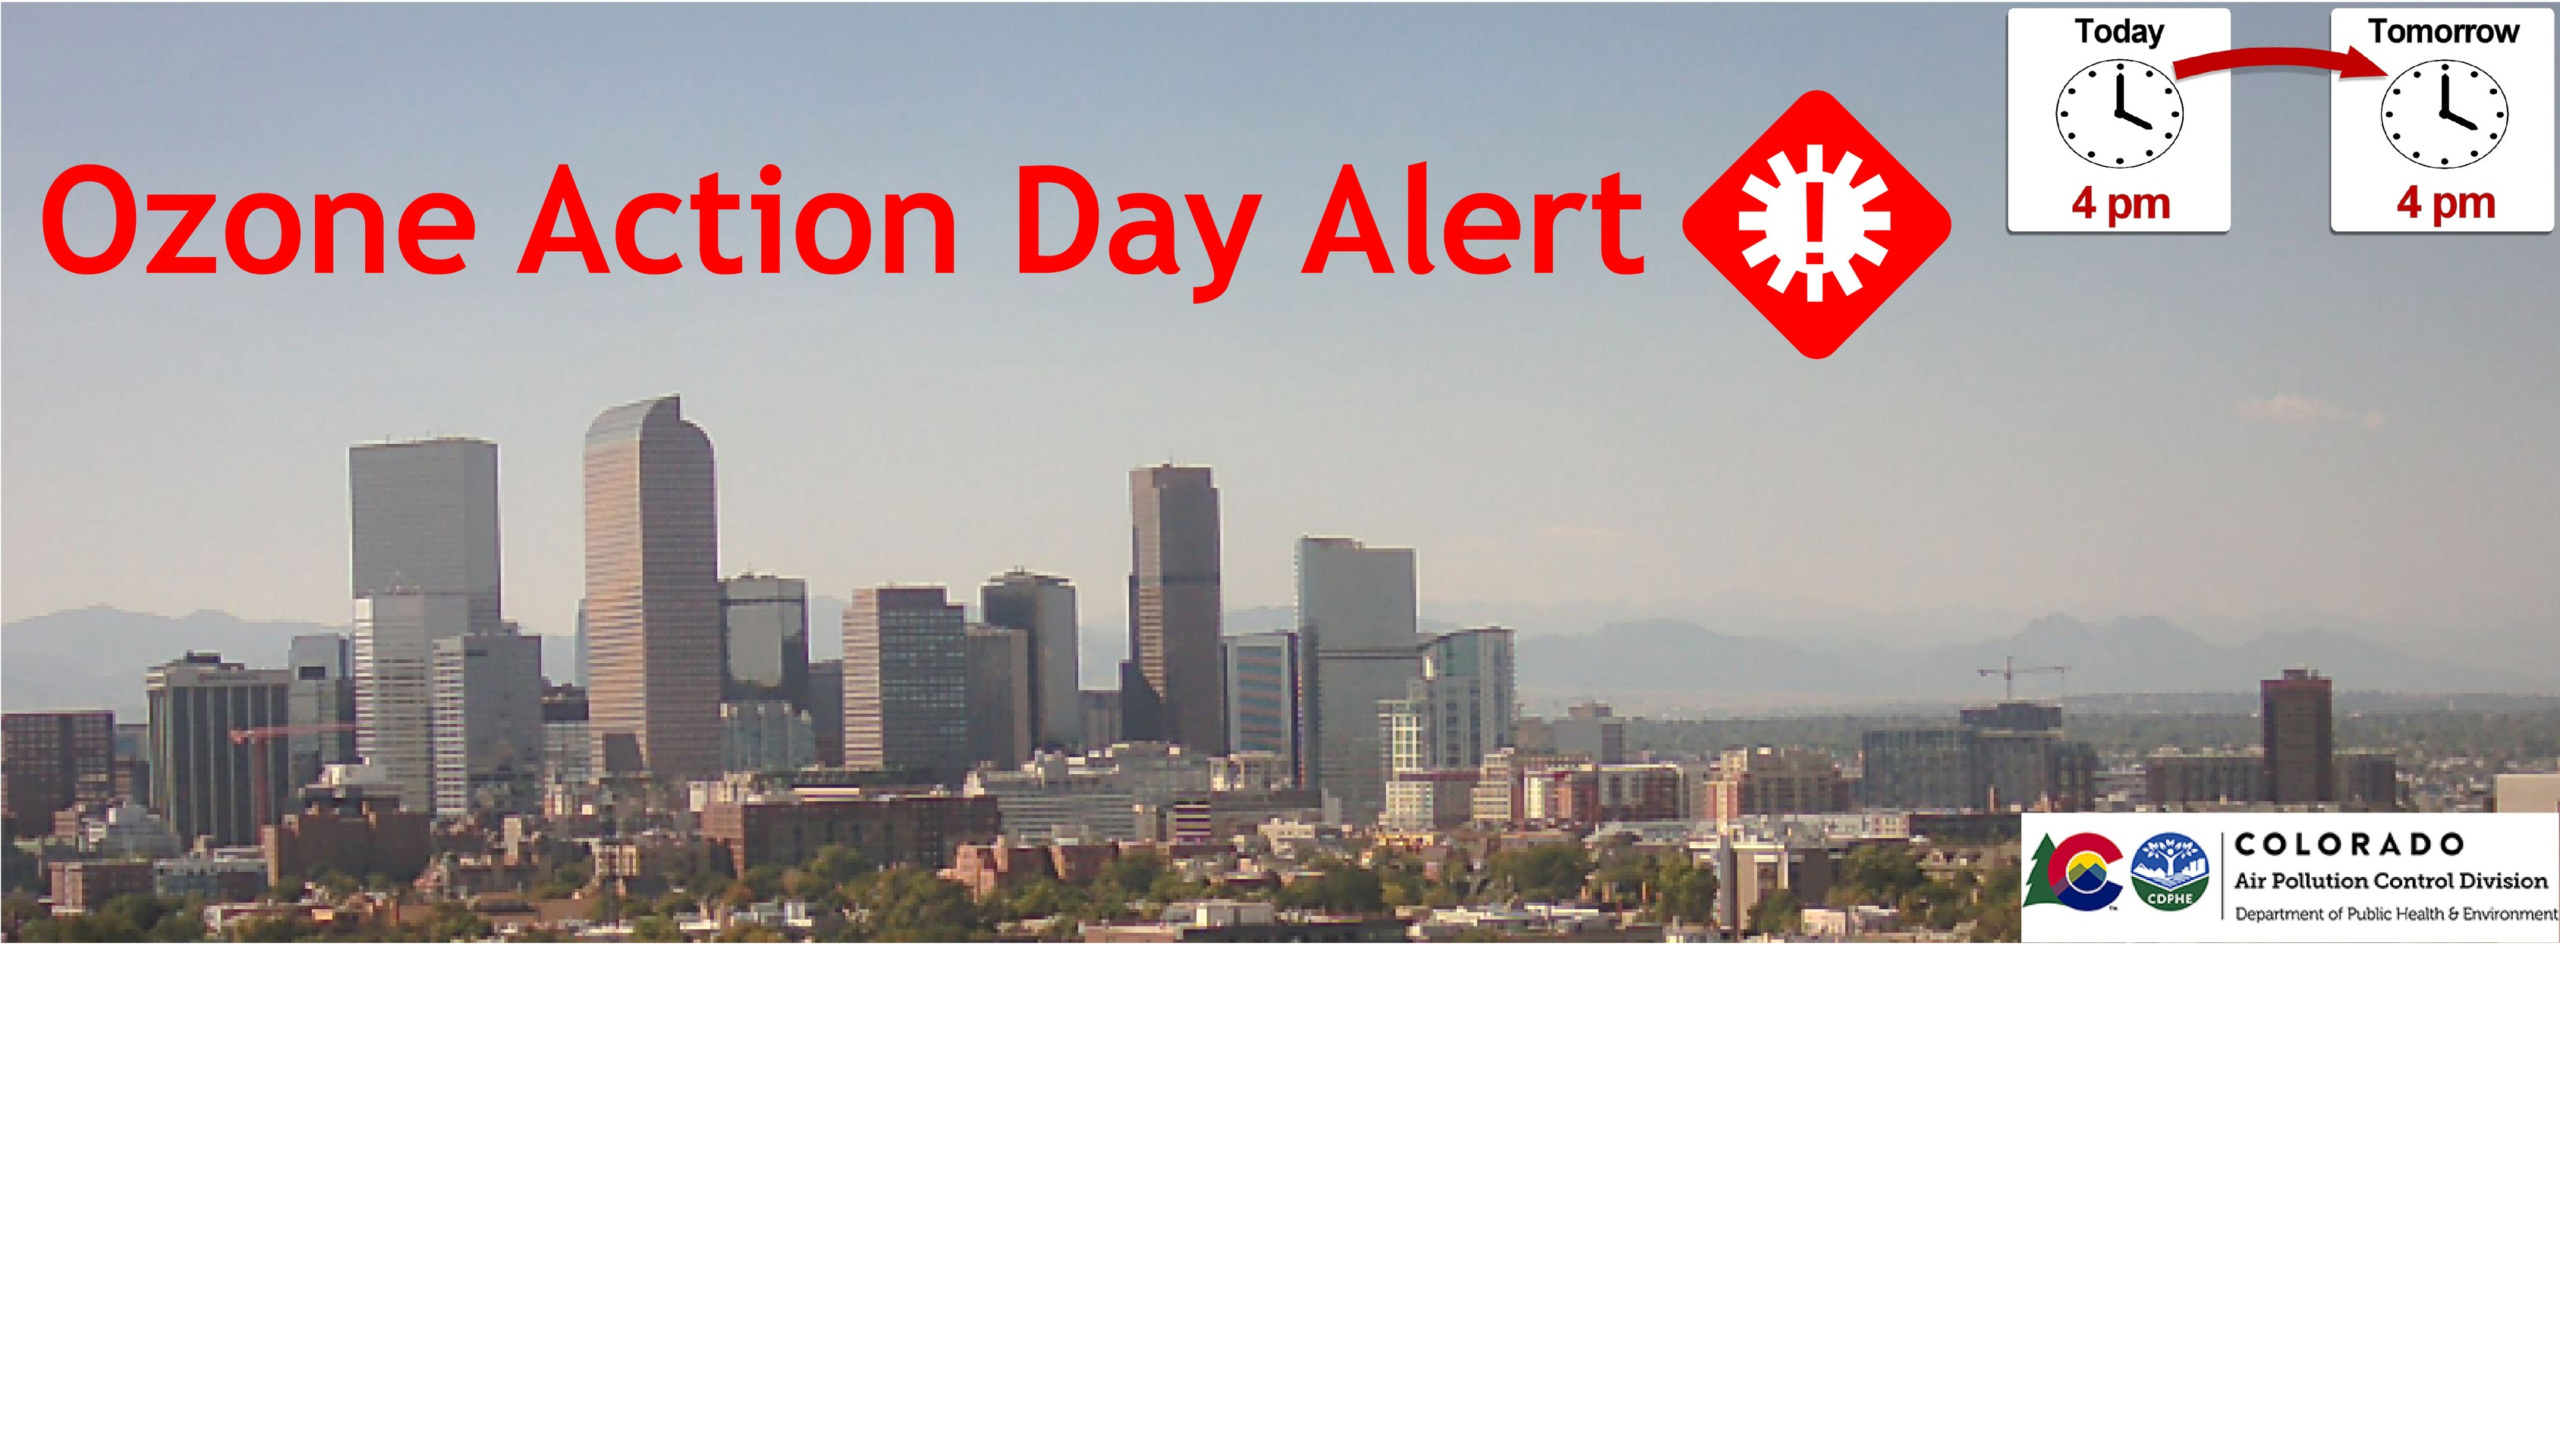 This image of an Ozone Action Day Alert shows the Denver skyline with smoggy skies in the background.